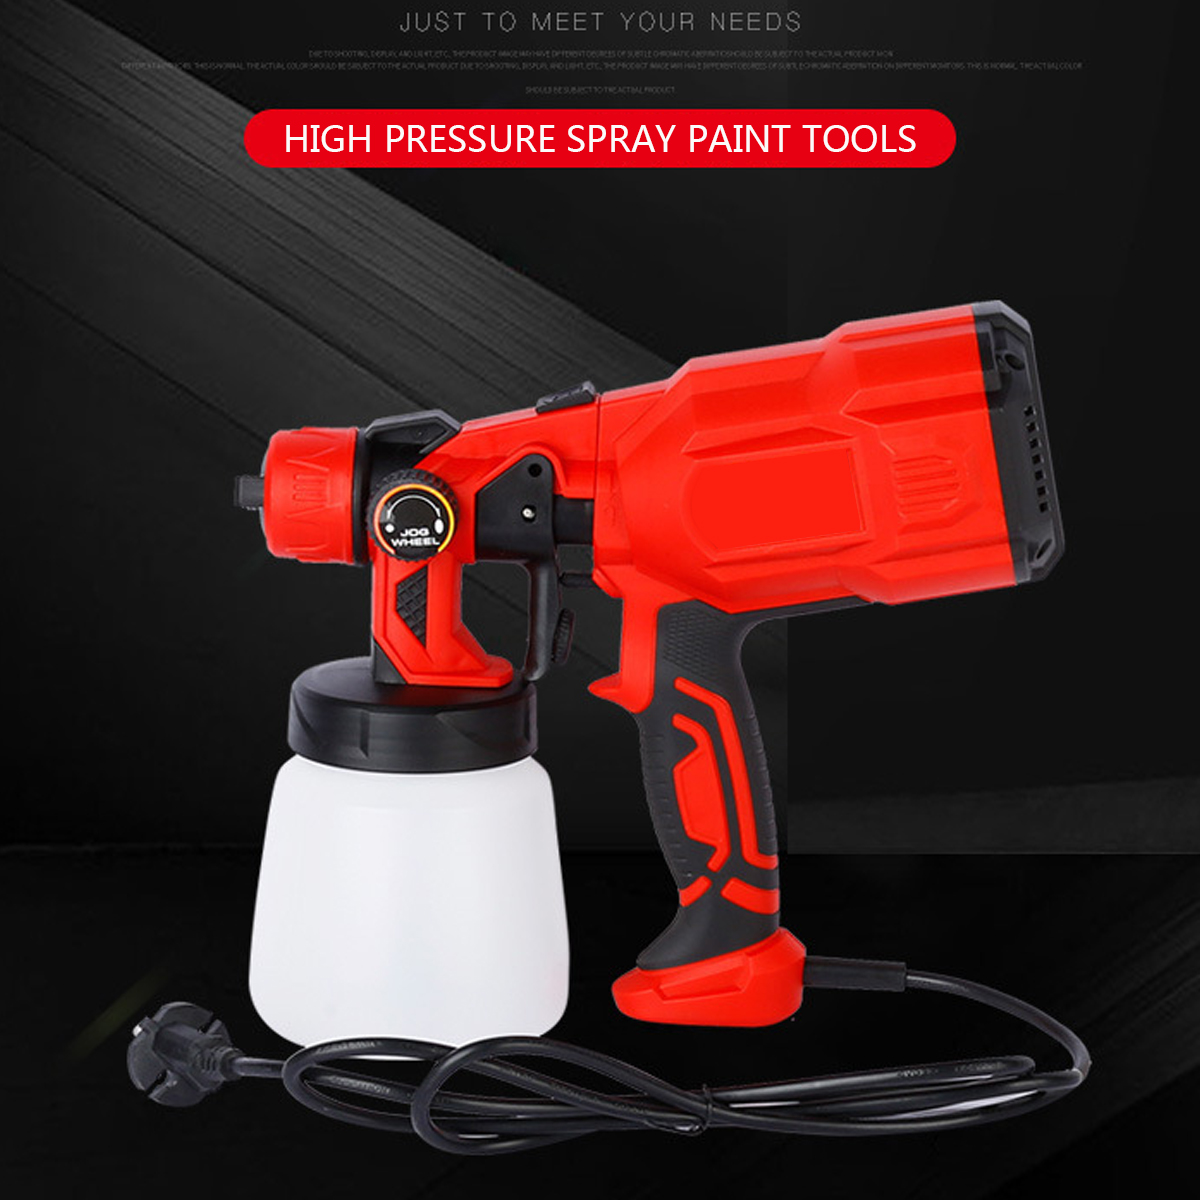 Removable-Electric-Paint-Spray-Guns-High-Pressure-Gravity-Feed-Kit-Speed-Regulator-Paint-Tools-Prime-1873508-7